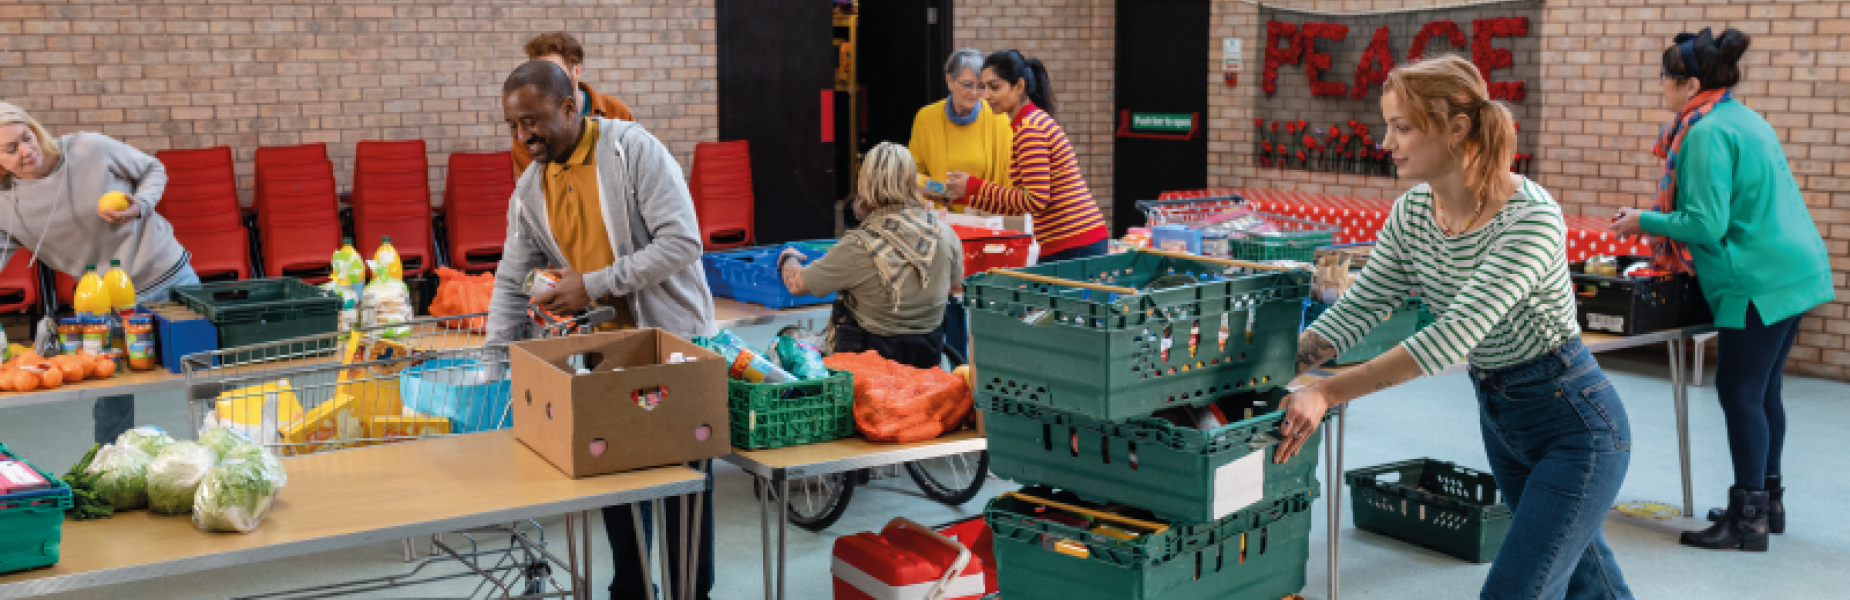 People working at a food bank